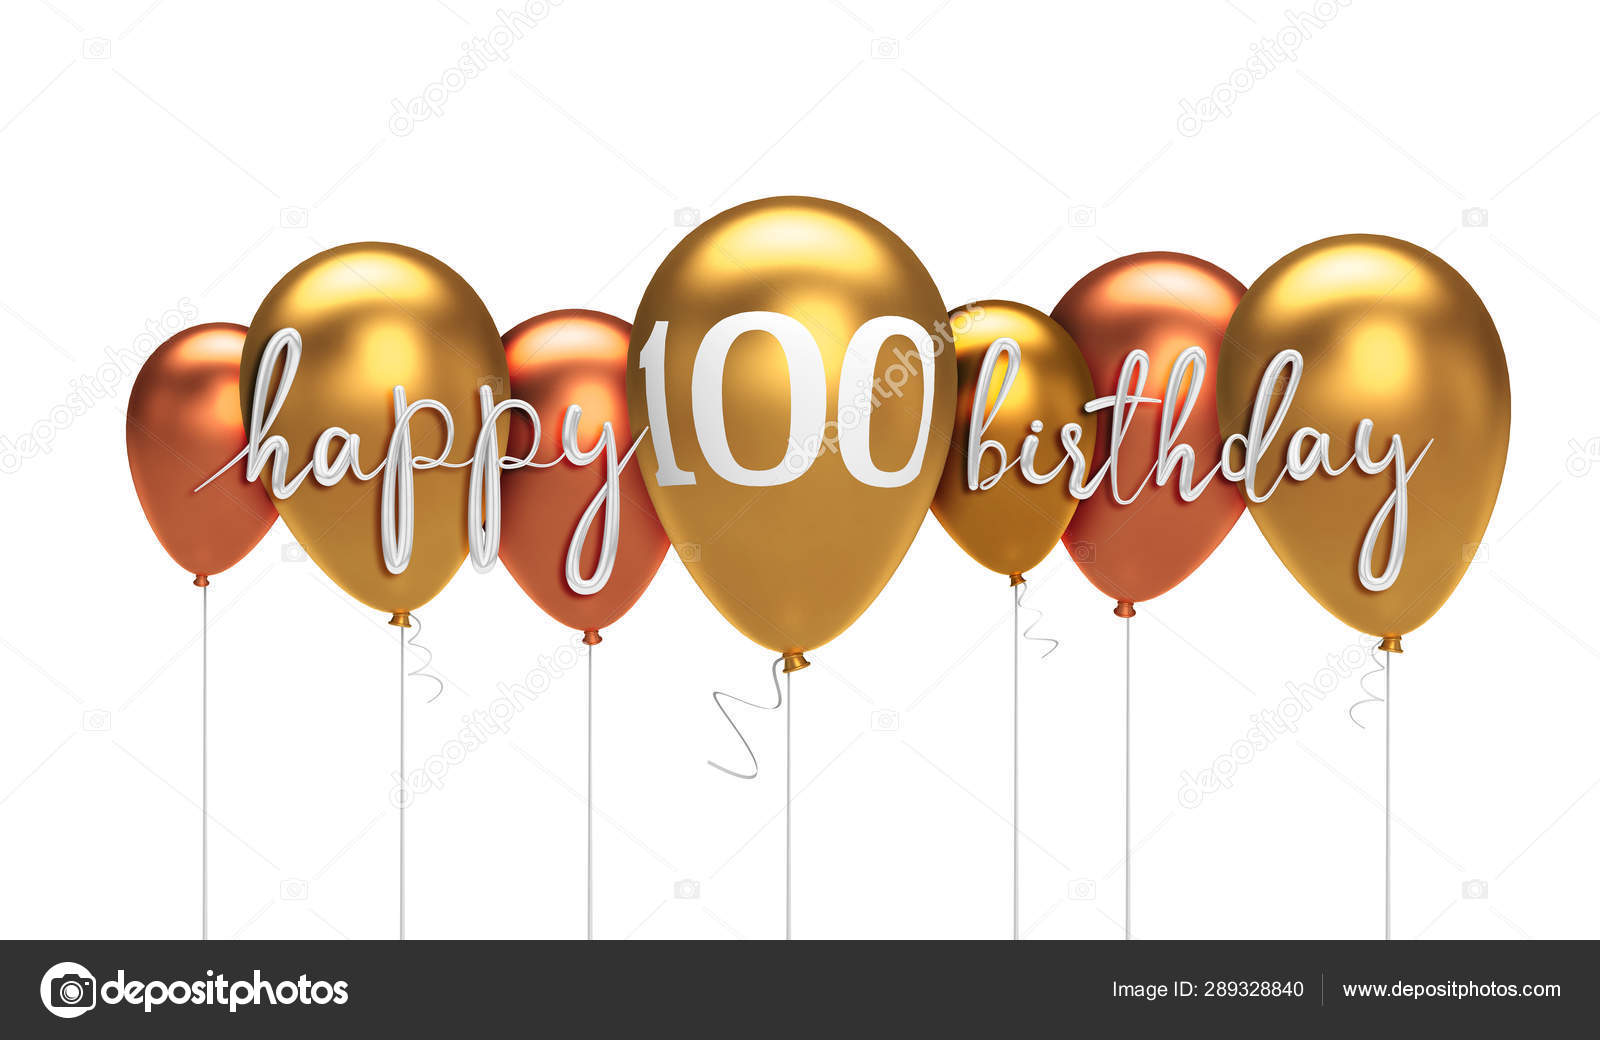 Happy 100th birthday gold balloon greeting background. 3D Render Stock Photo by ©InkDropCreative 289328840